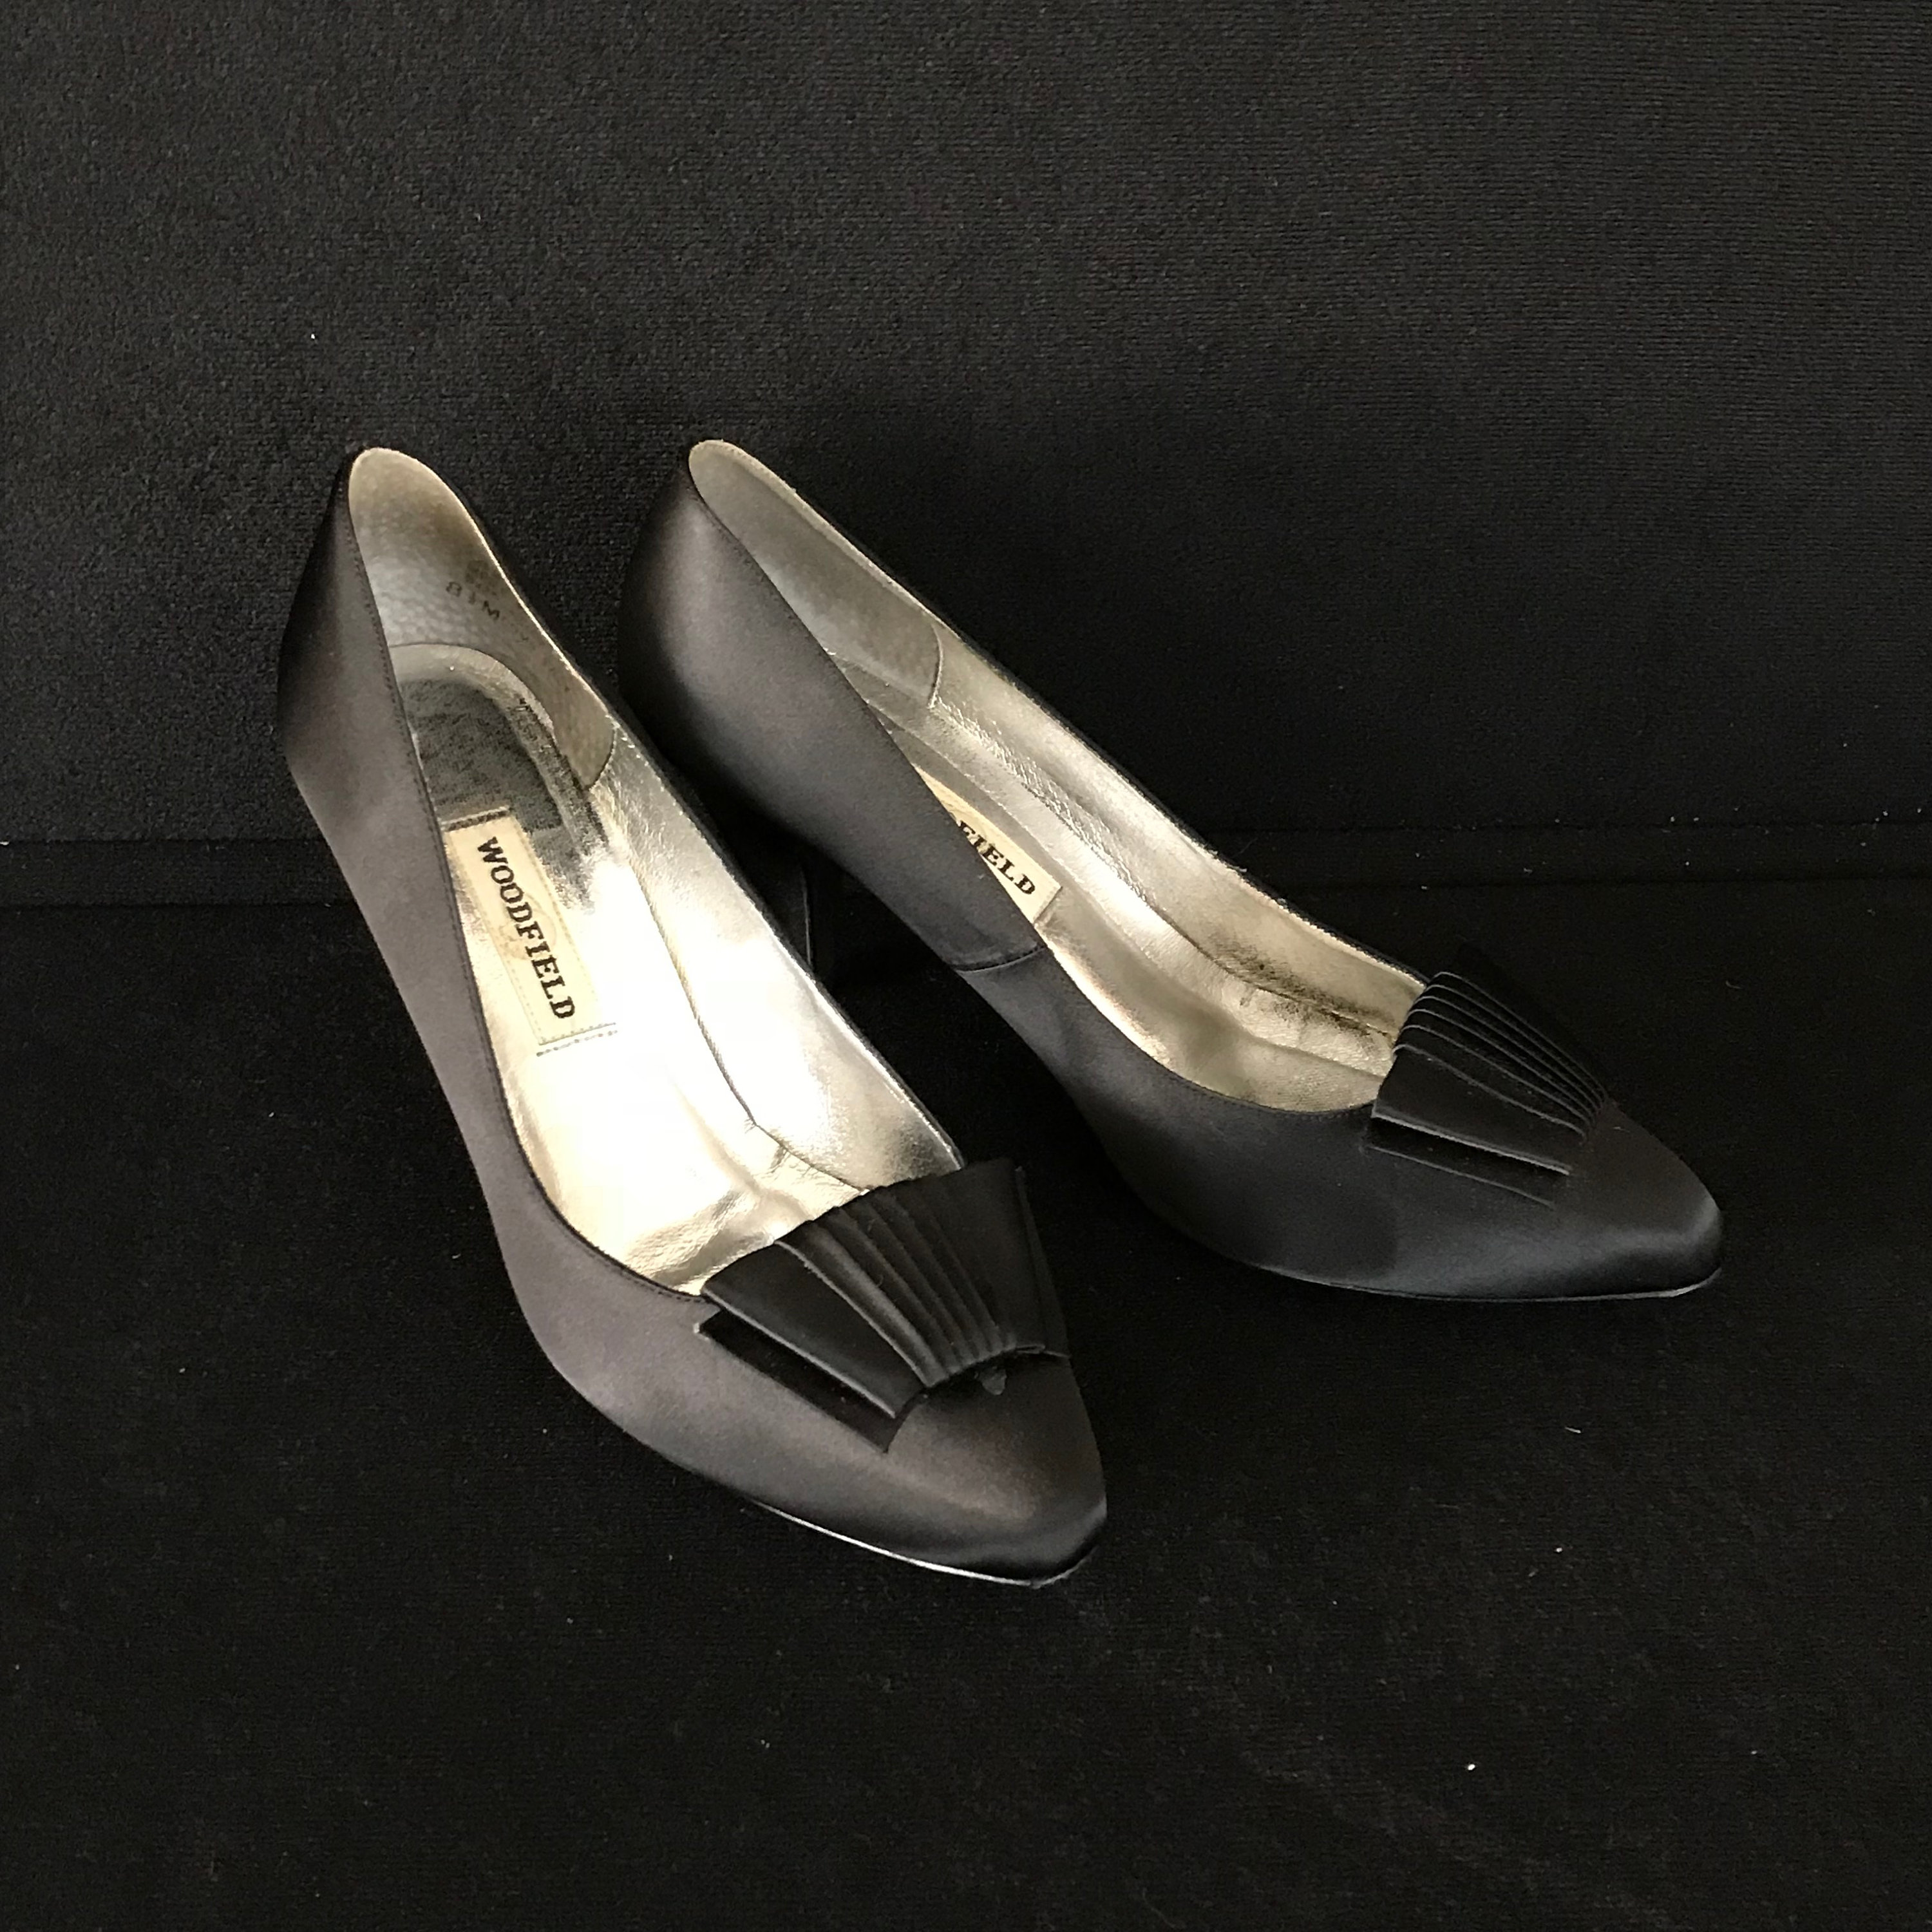 Vintage Black Satin Pumps with Bow size 8.5 | Etsy